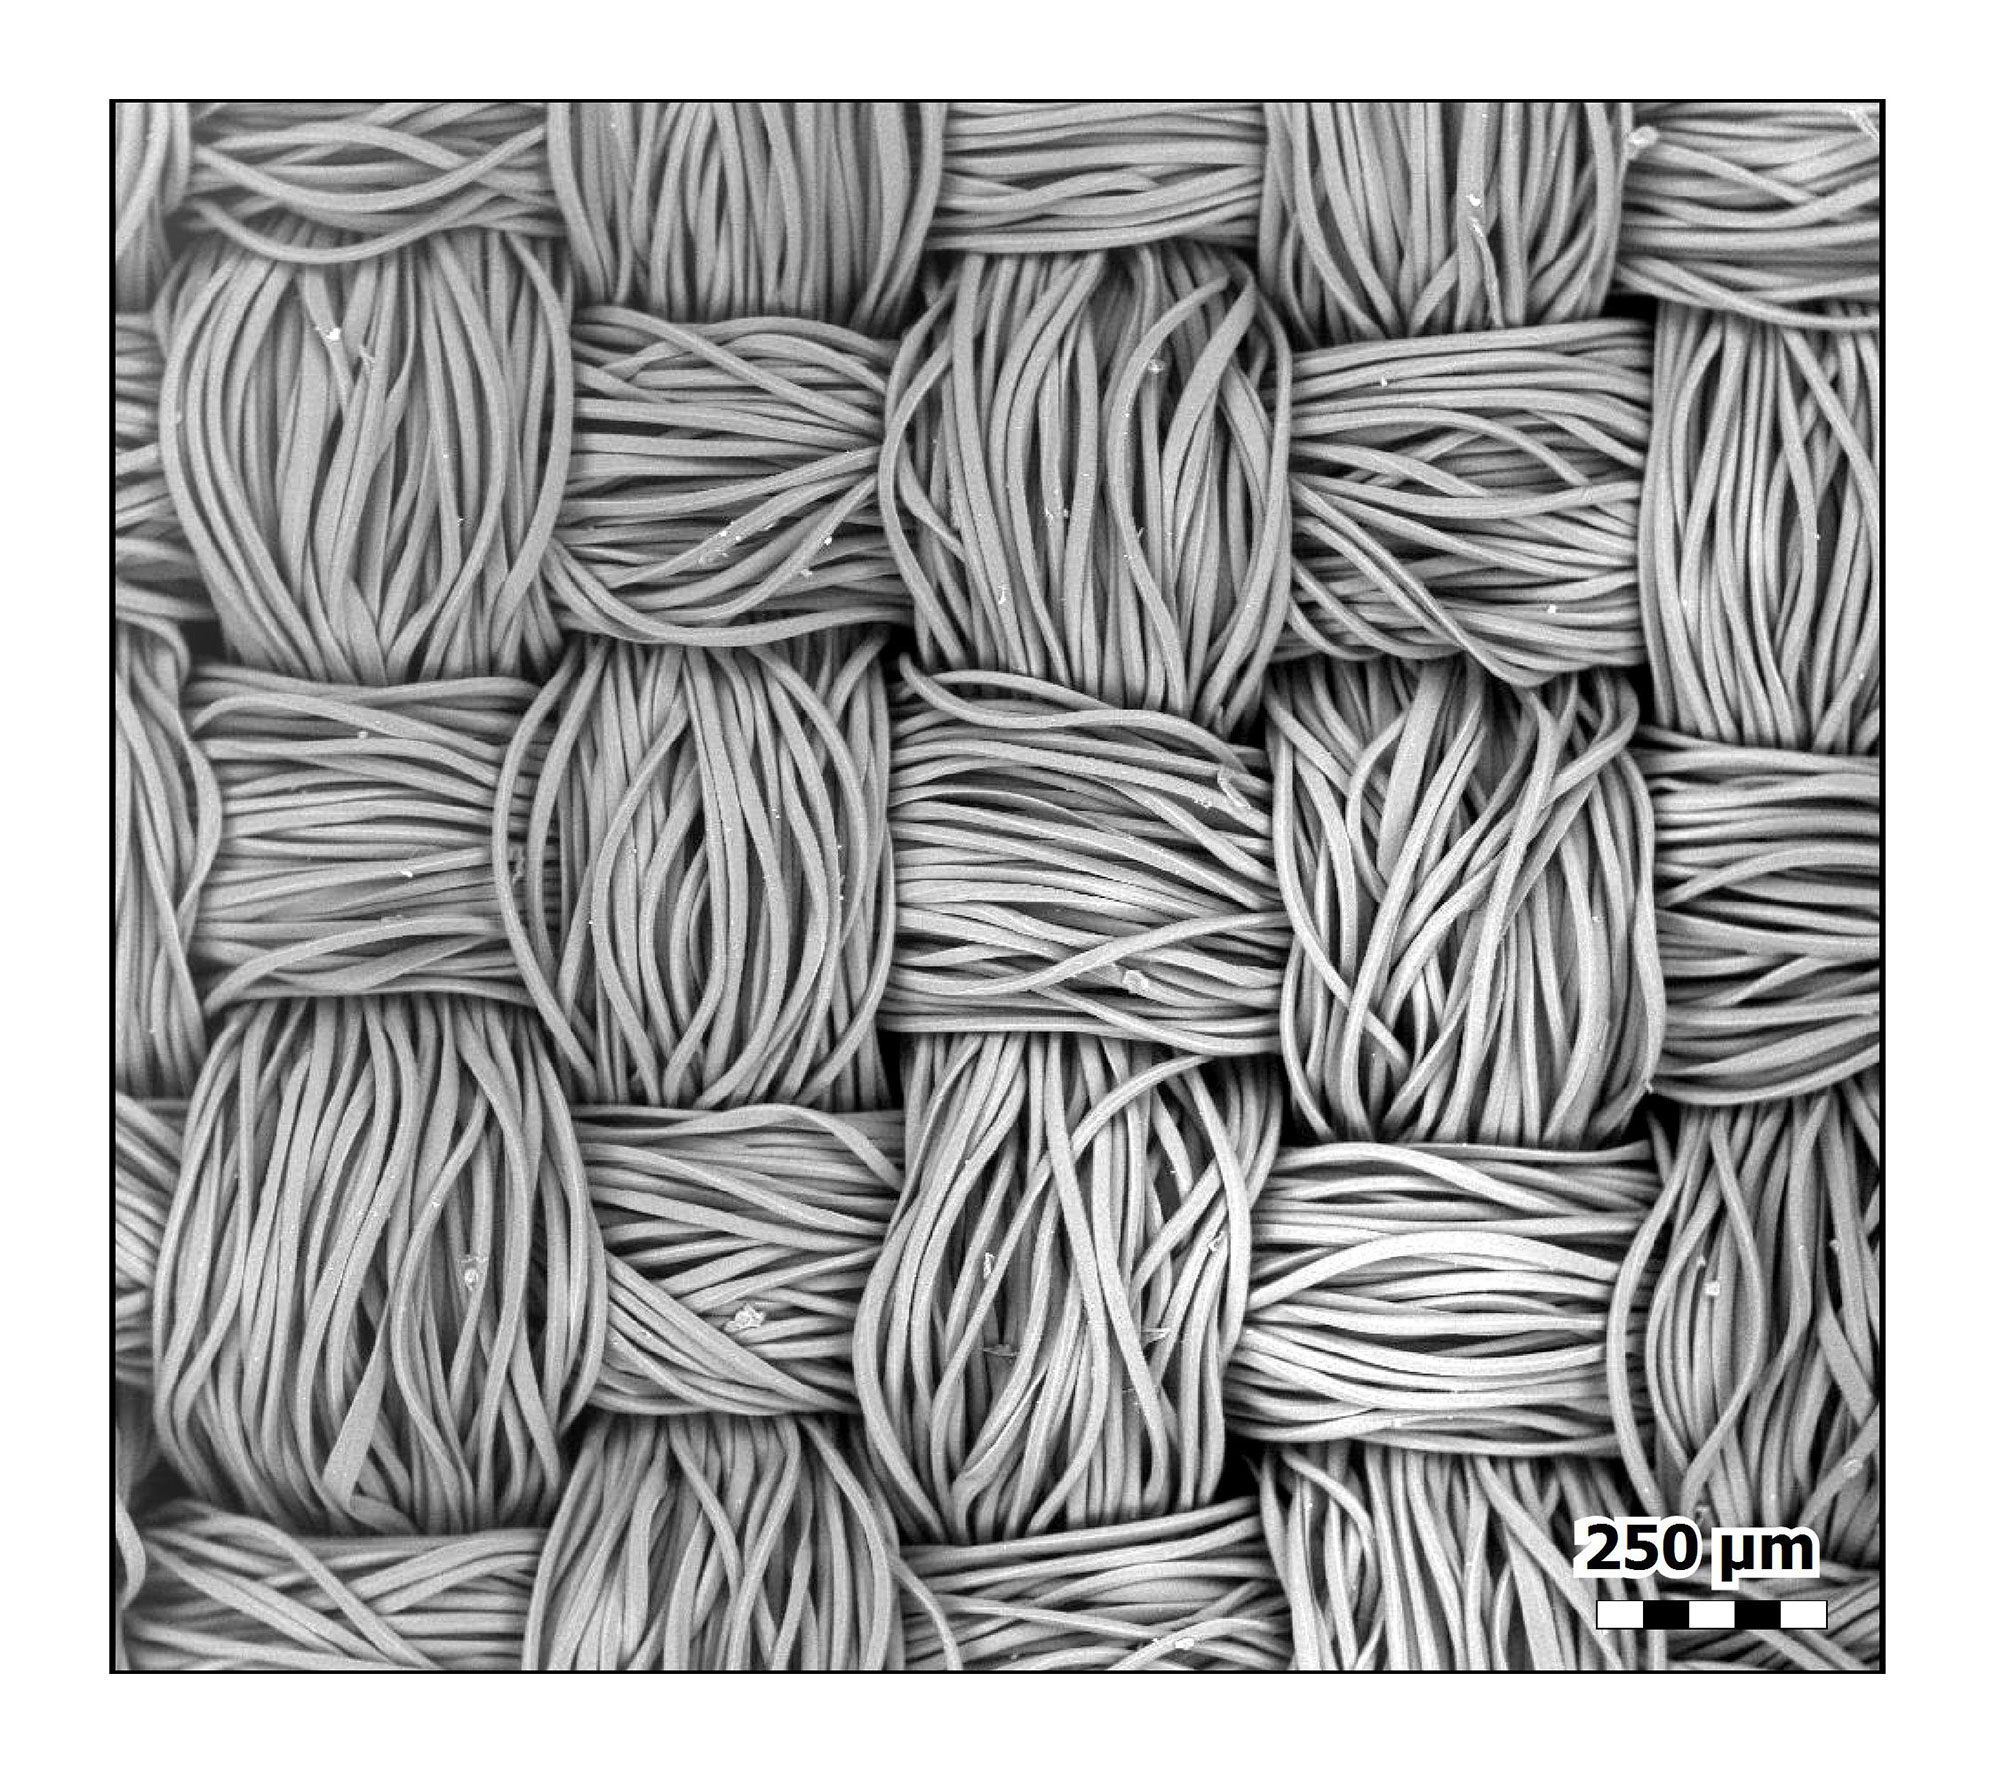 This top-down view of polyester shows how the fibres stay nicely bundled. This image is from the same type of fabric as those quick-drying shirts you might wear to the gym.